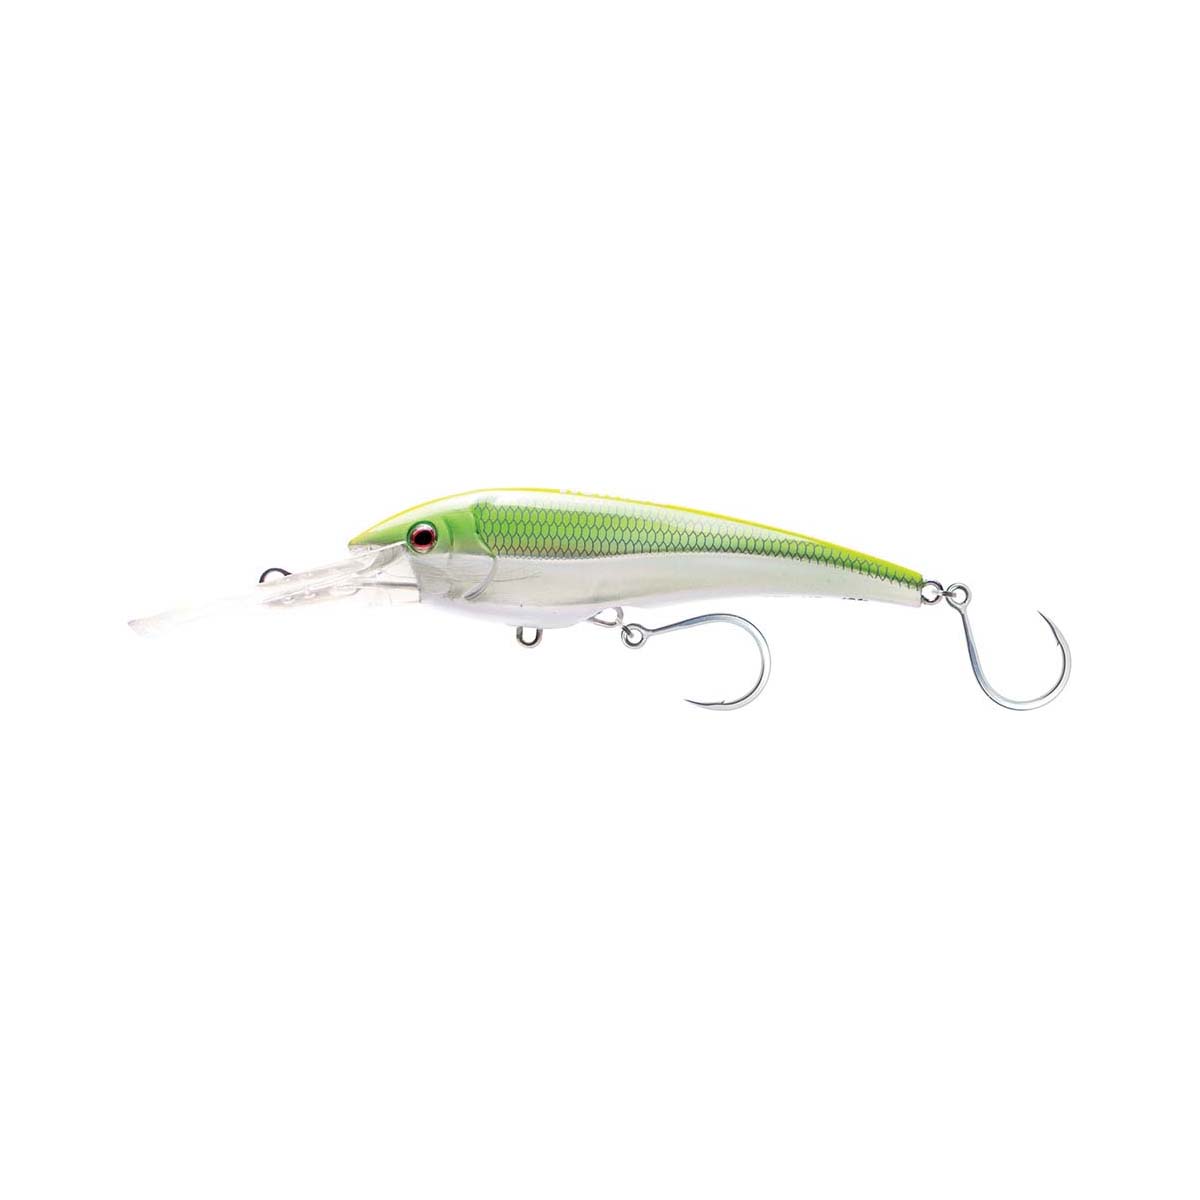 Nomad DTX Minnow Hard Body Lure 110mm Chartreuse Chrome @ Club BCF